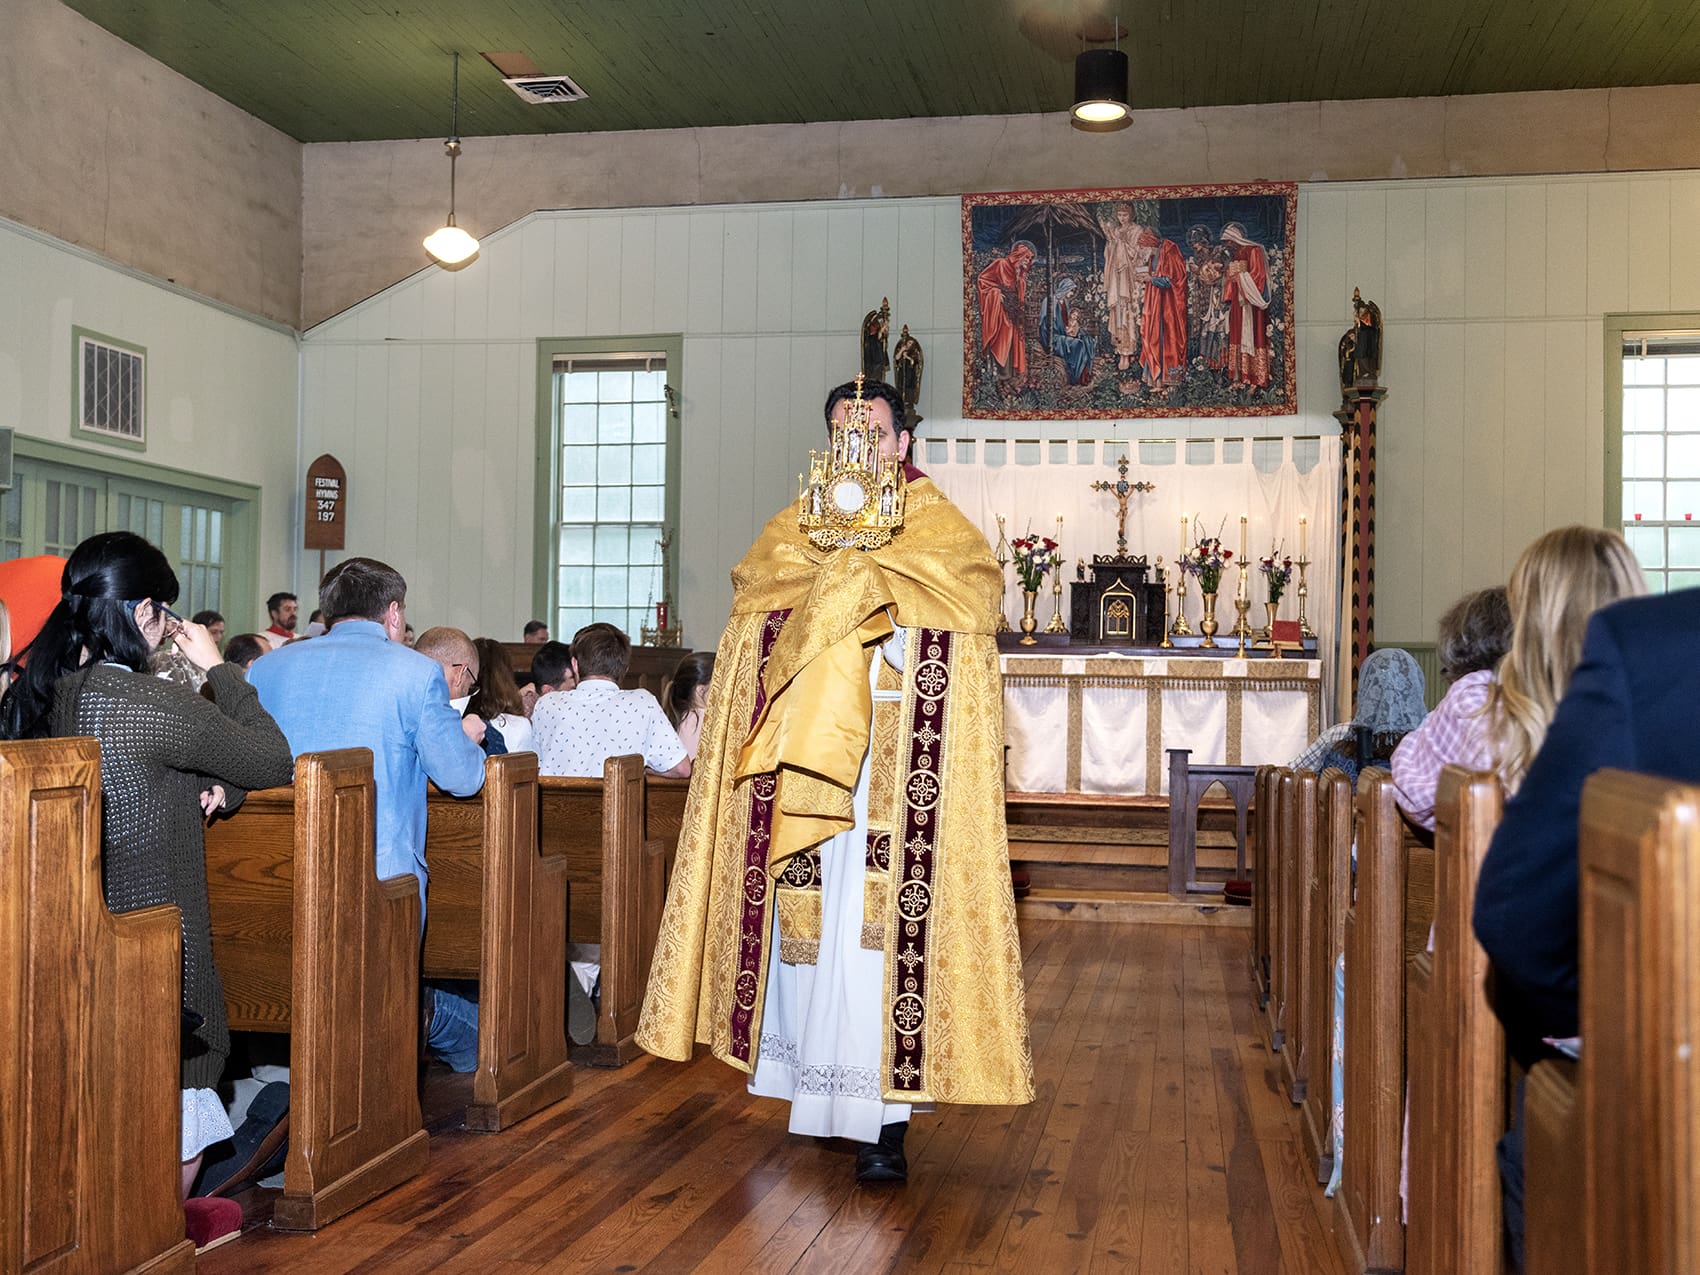 Bishop Steven J. Lopes of the Ordinariate of the Chair of Saint Peter, processes with the Blessed Sacrament during the Feast of Corpus Christi at Saint Aelred Church in Bishop. Photo by Johnathon Kelso